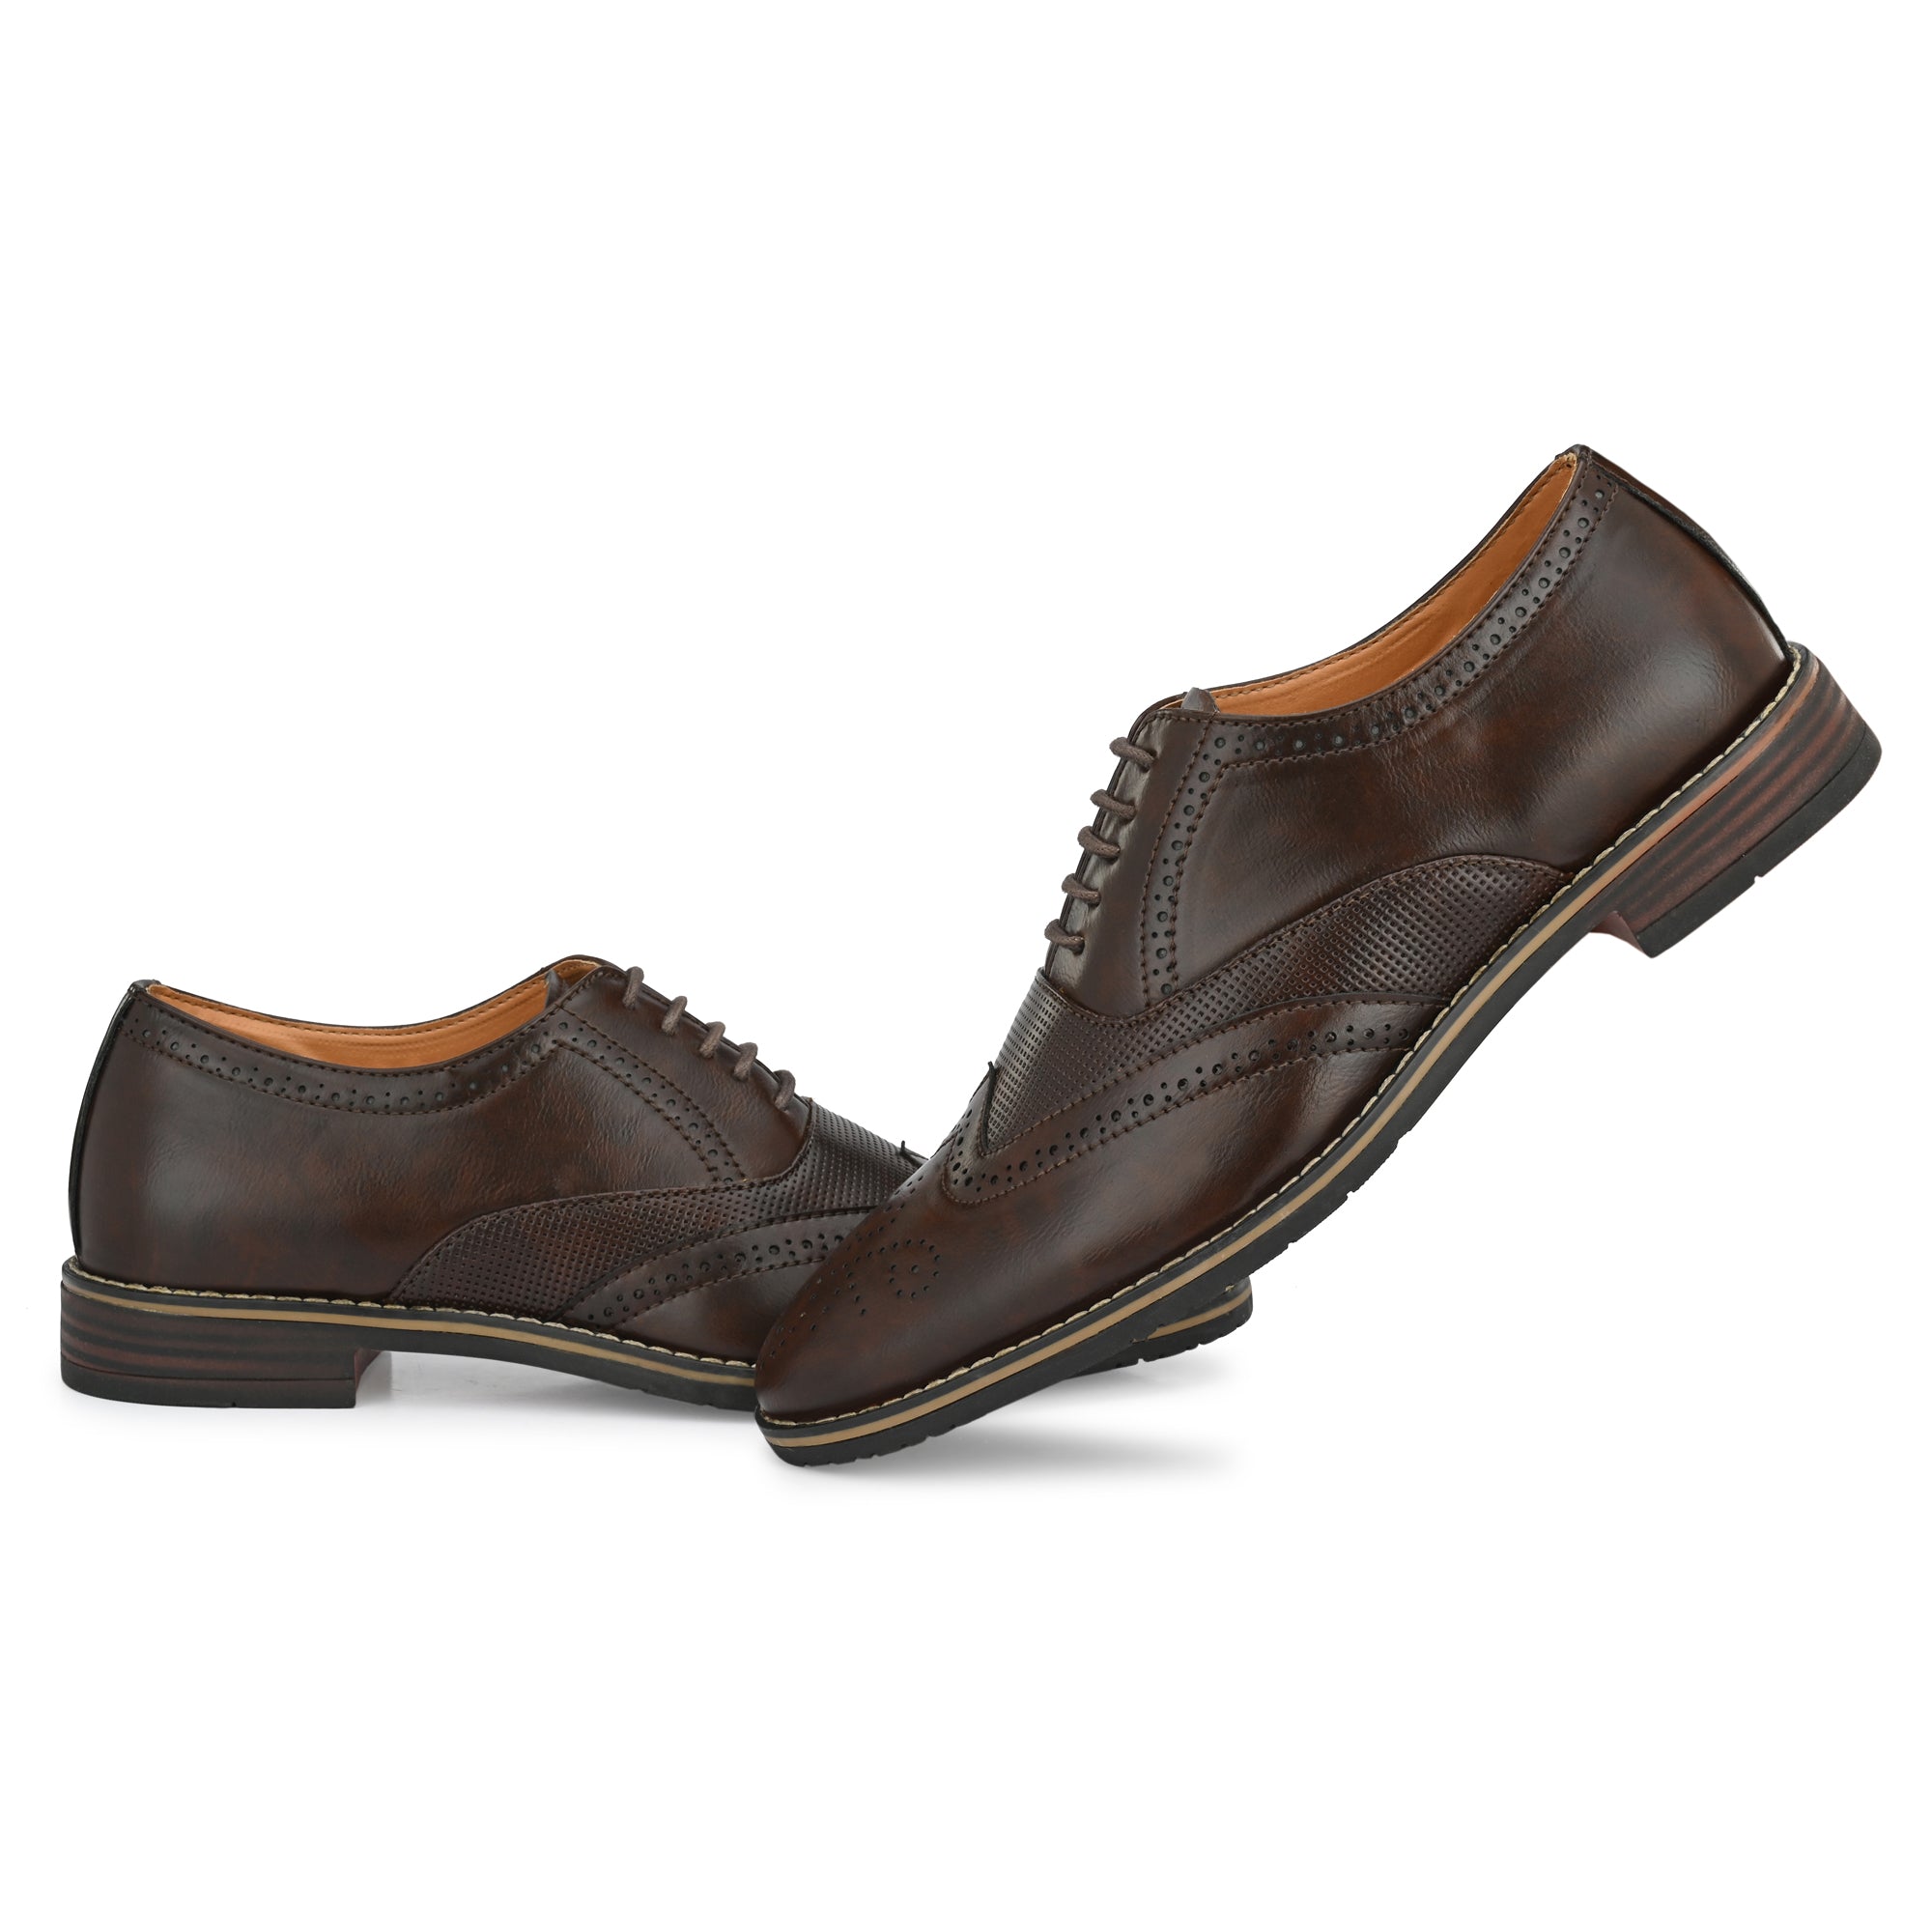 Attitudist Handcrafted Brown Formal Lace-up Derby Shoes Full Brouges With Wingtips For Men MTOBSF